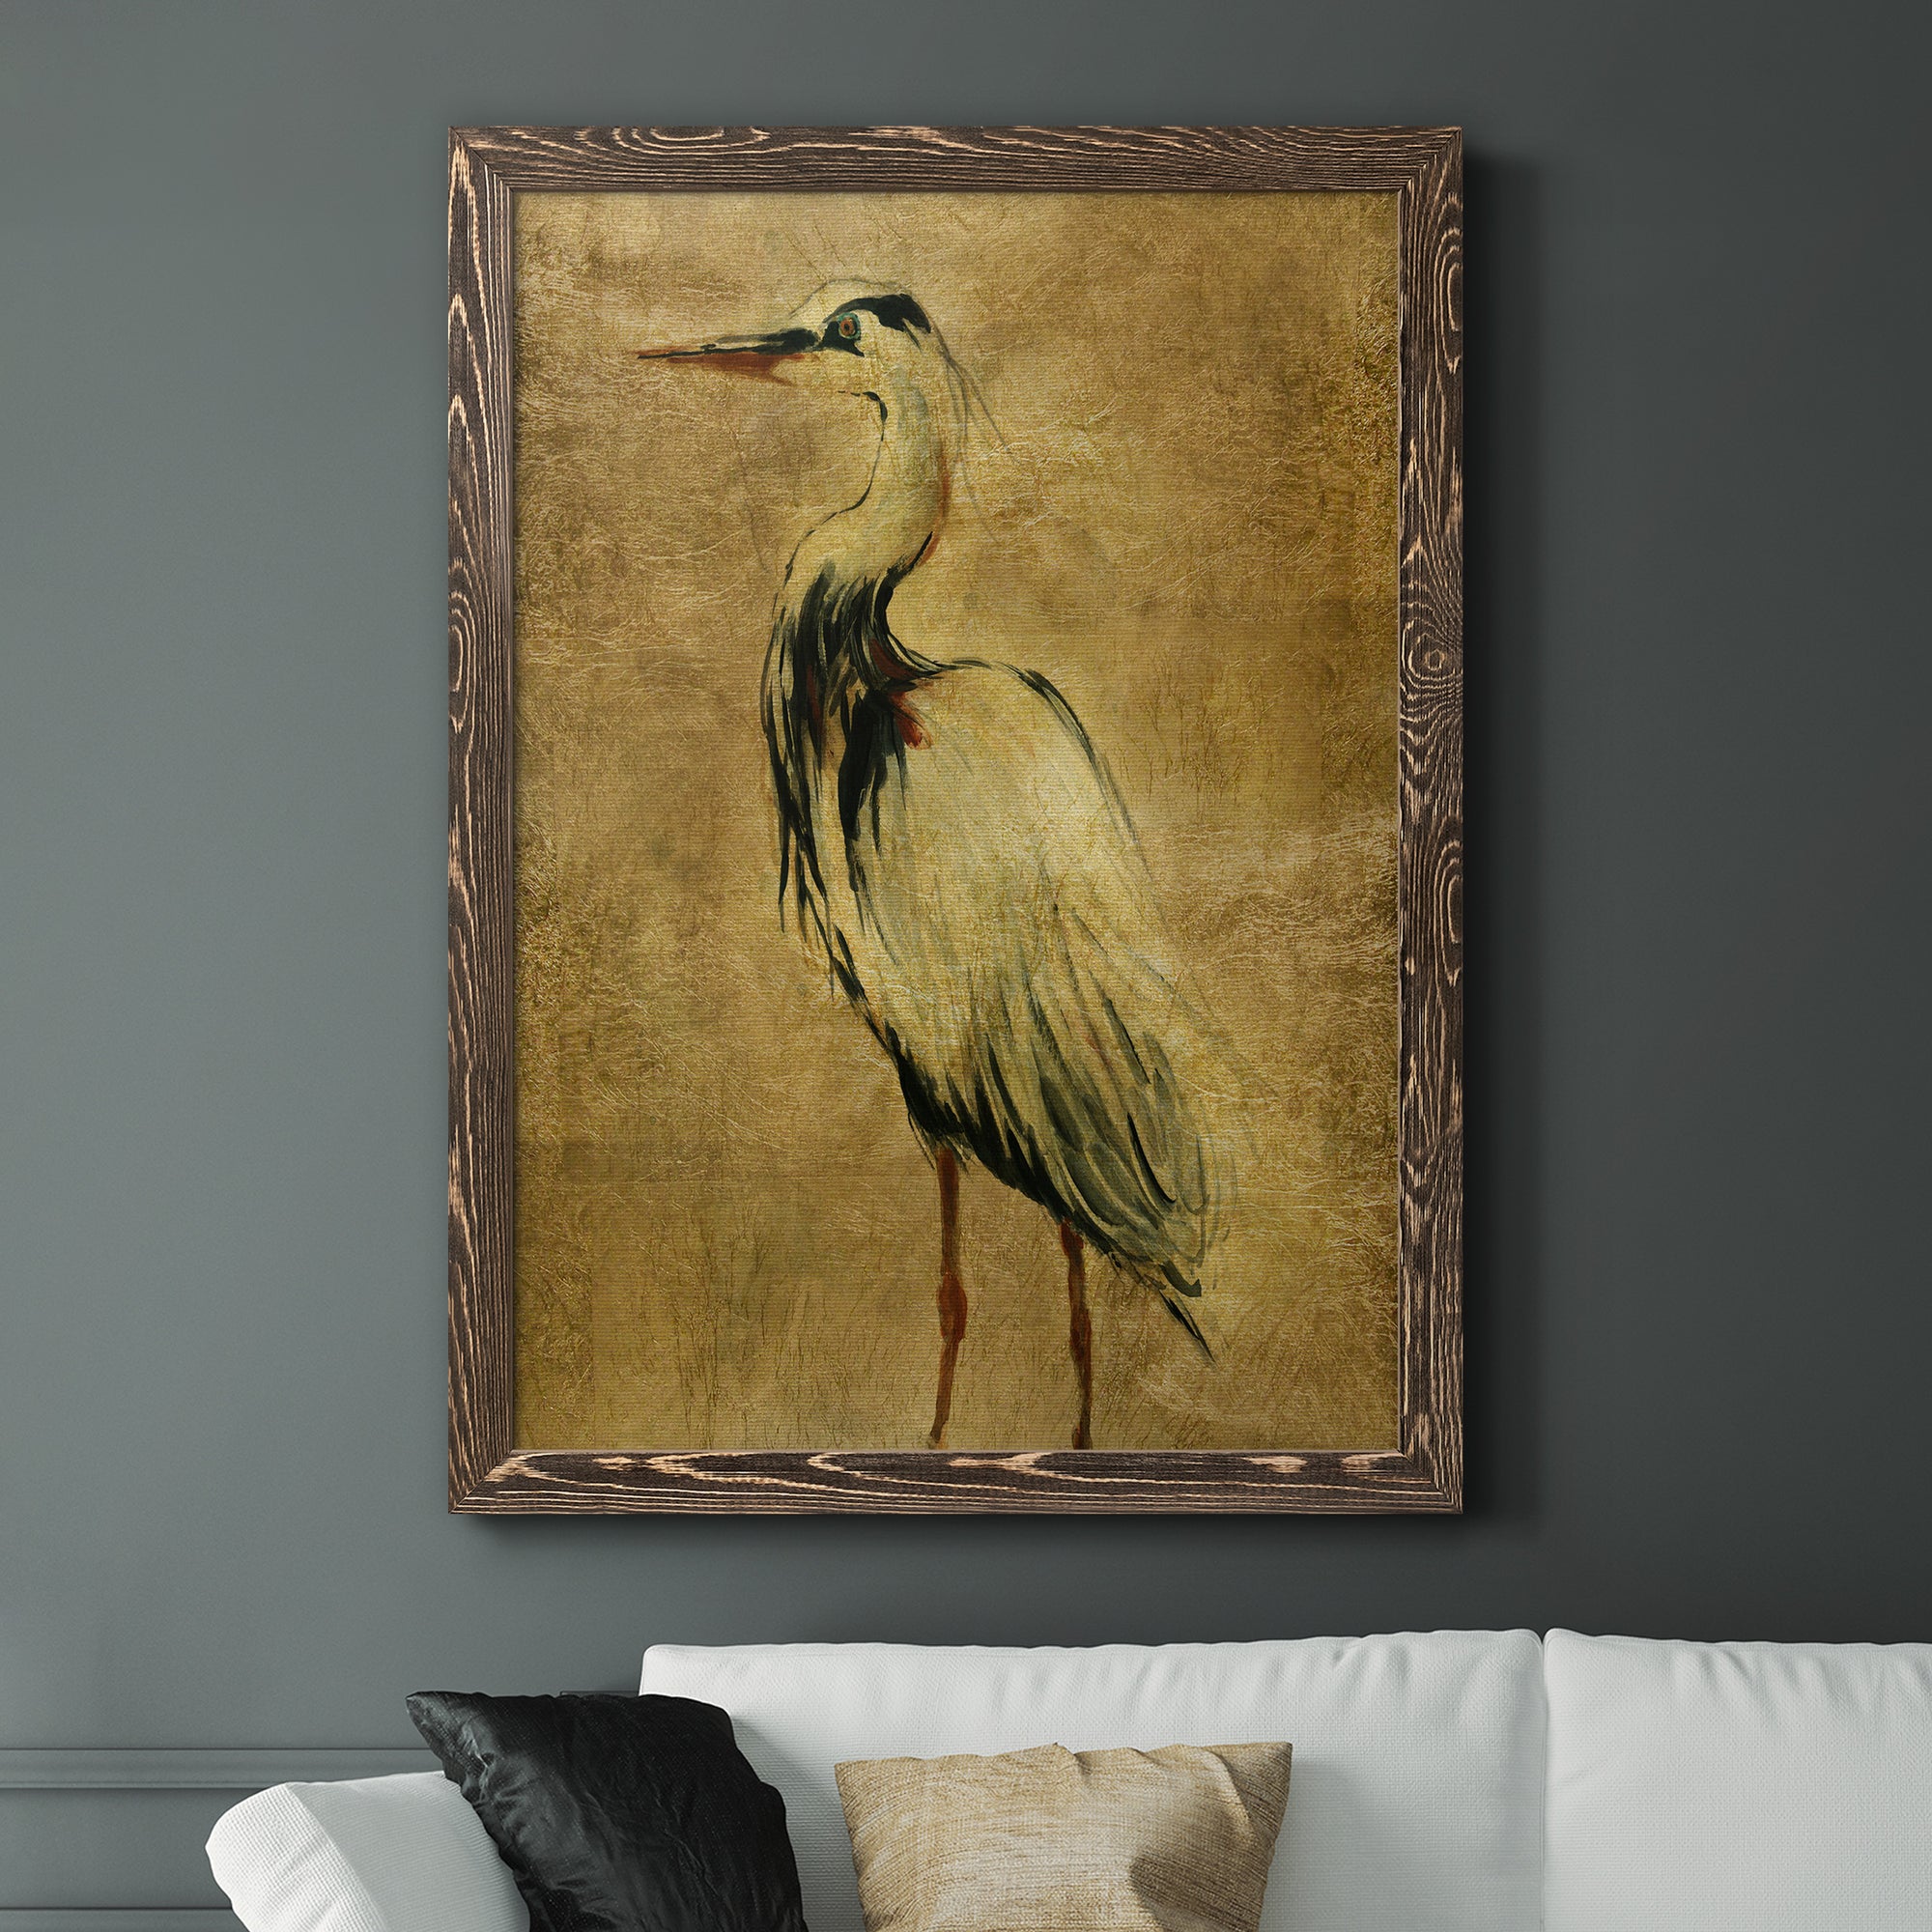 Gold Crane at Dusk II - Premium Canvas Framed in Barnwood - Ready to Hang